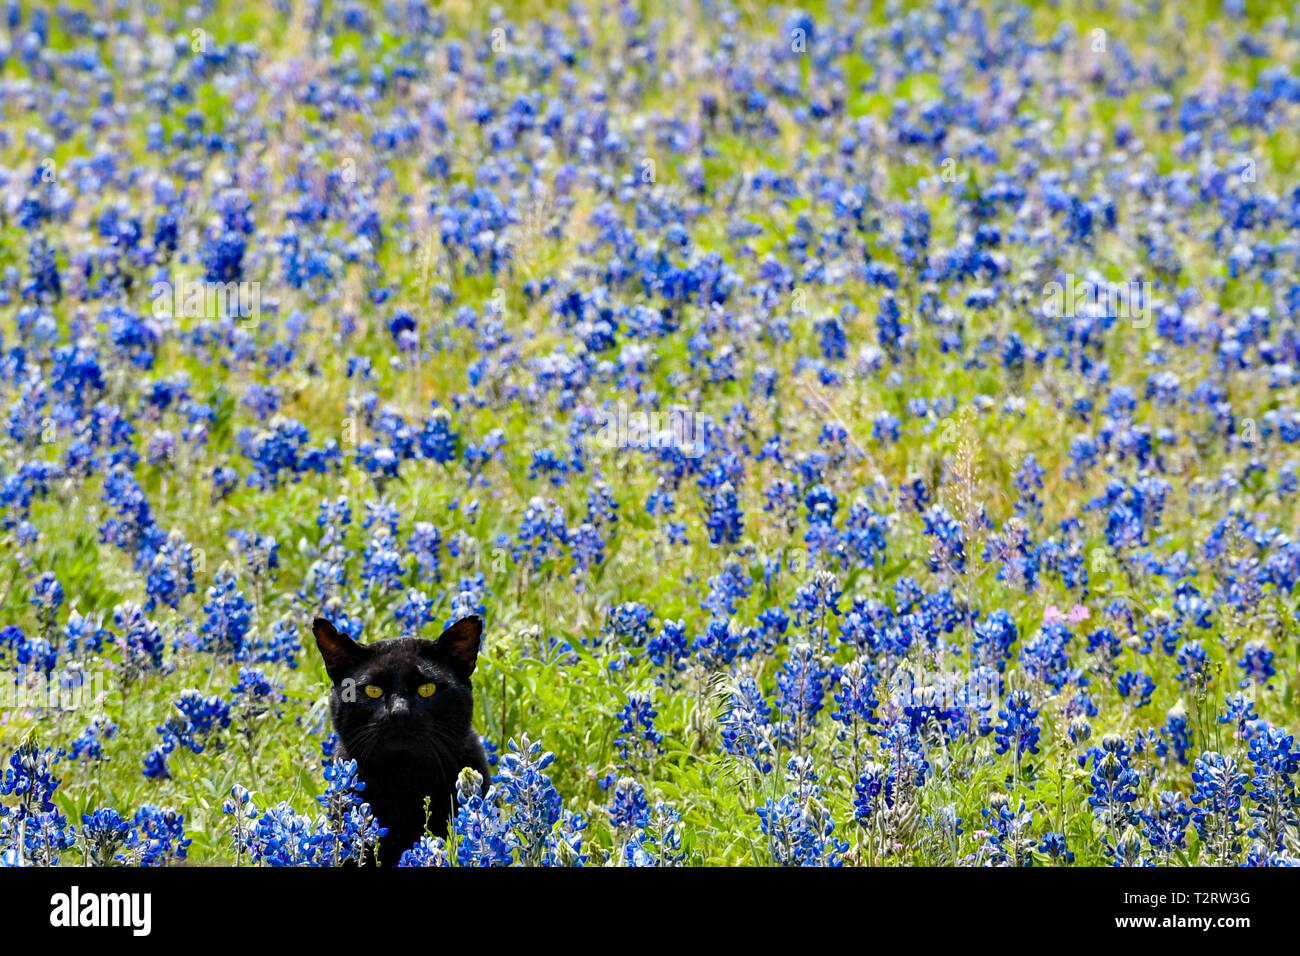 Cat in the Bluebonnets Stock Photo